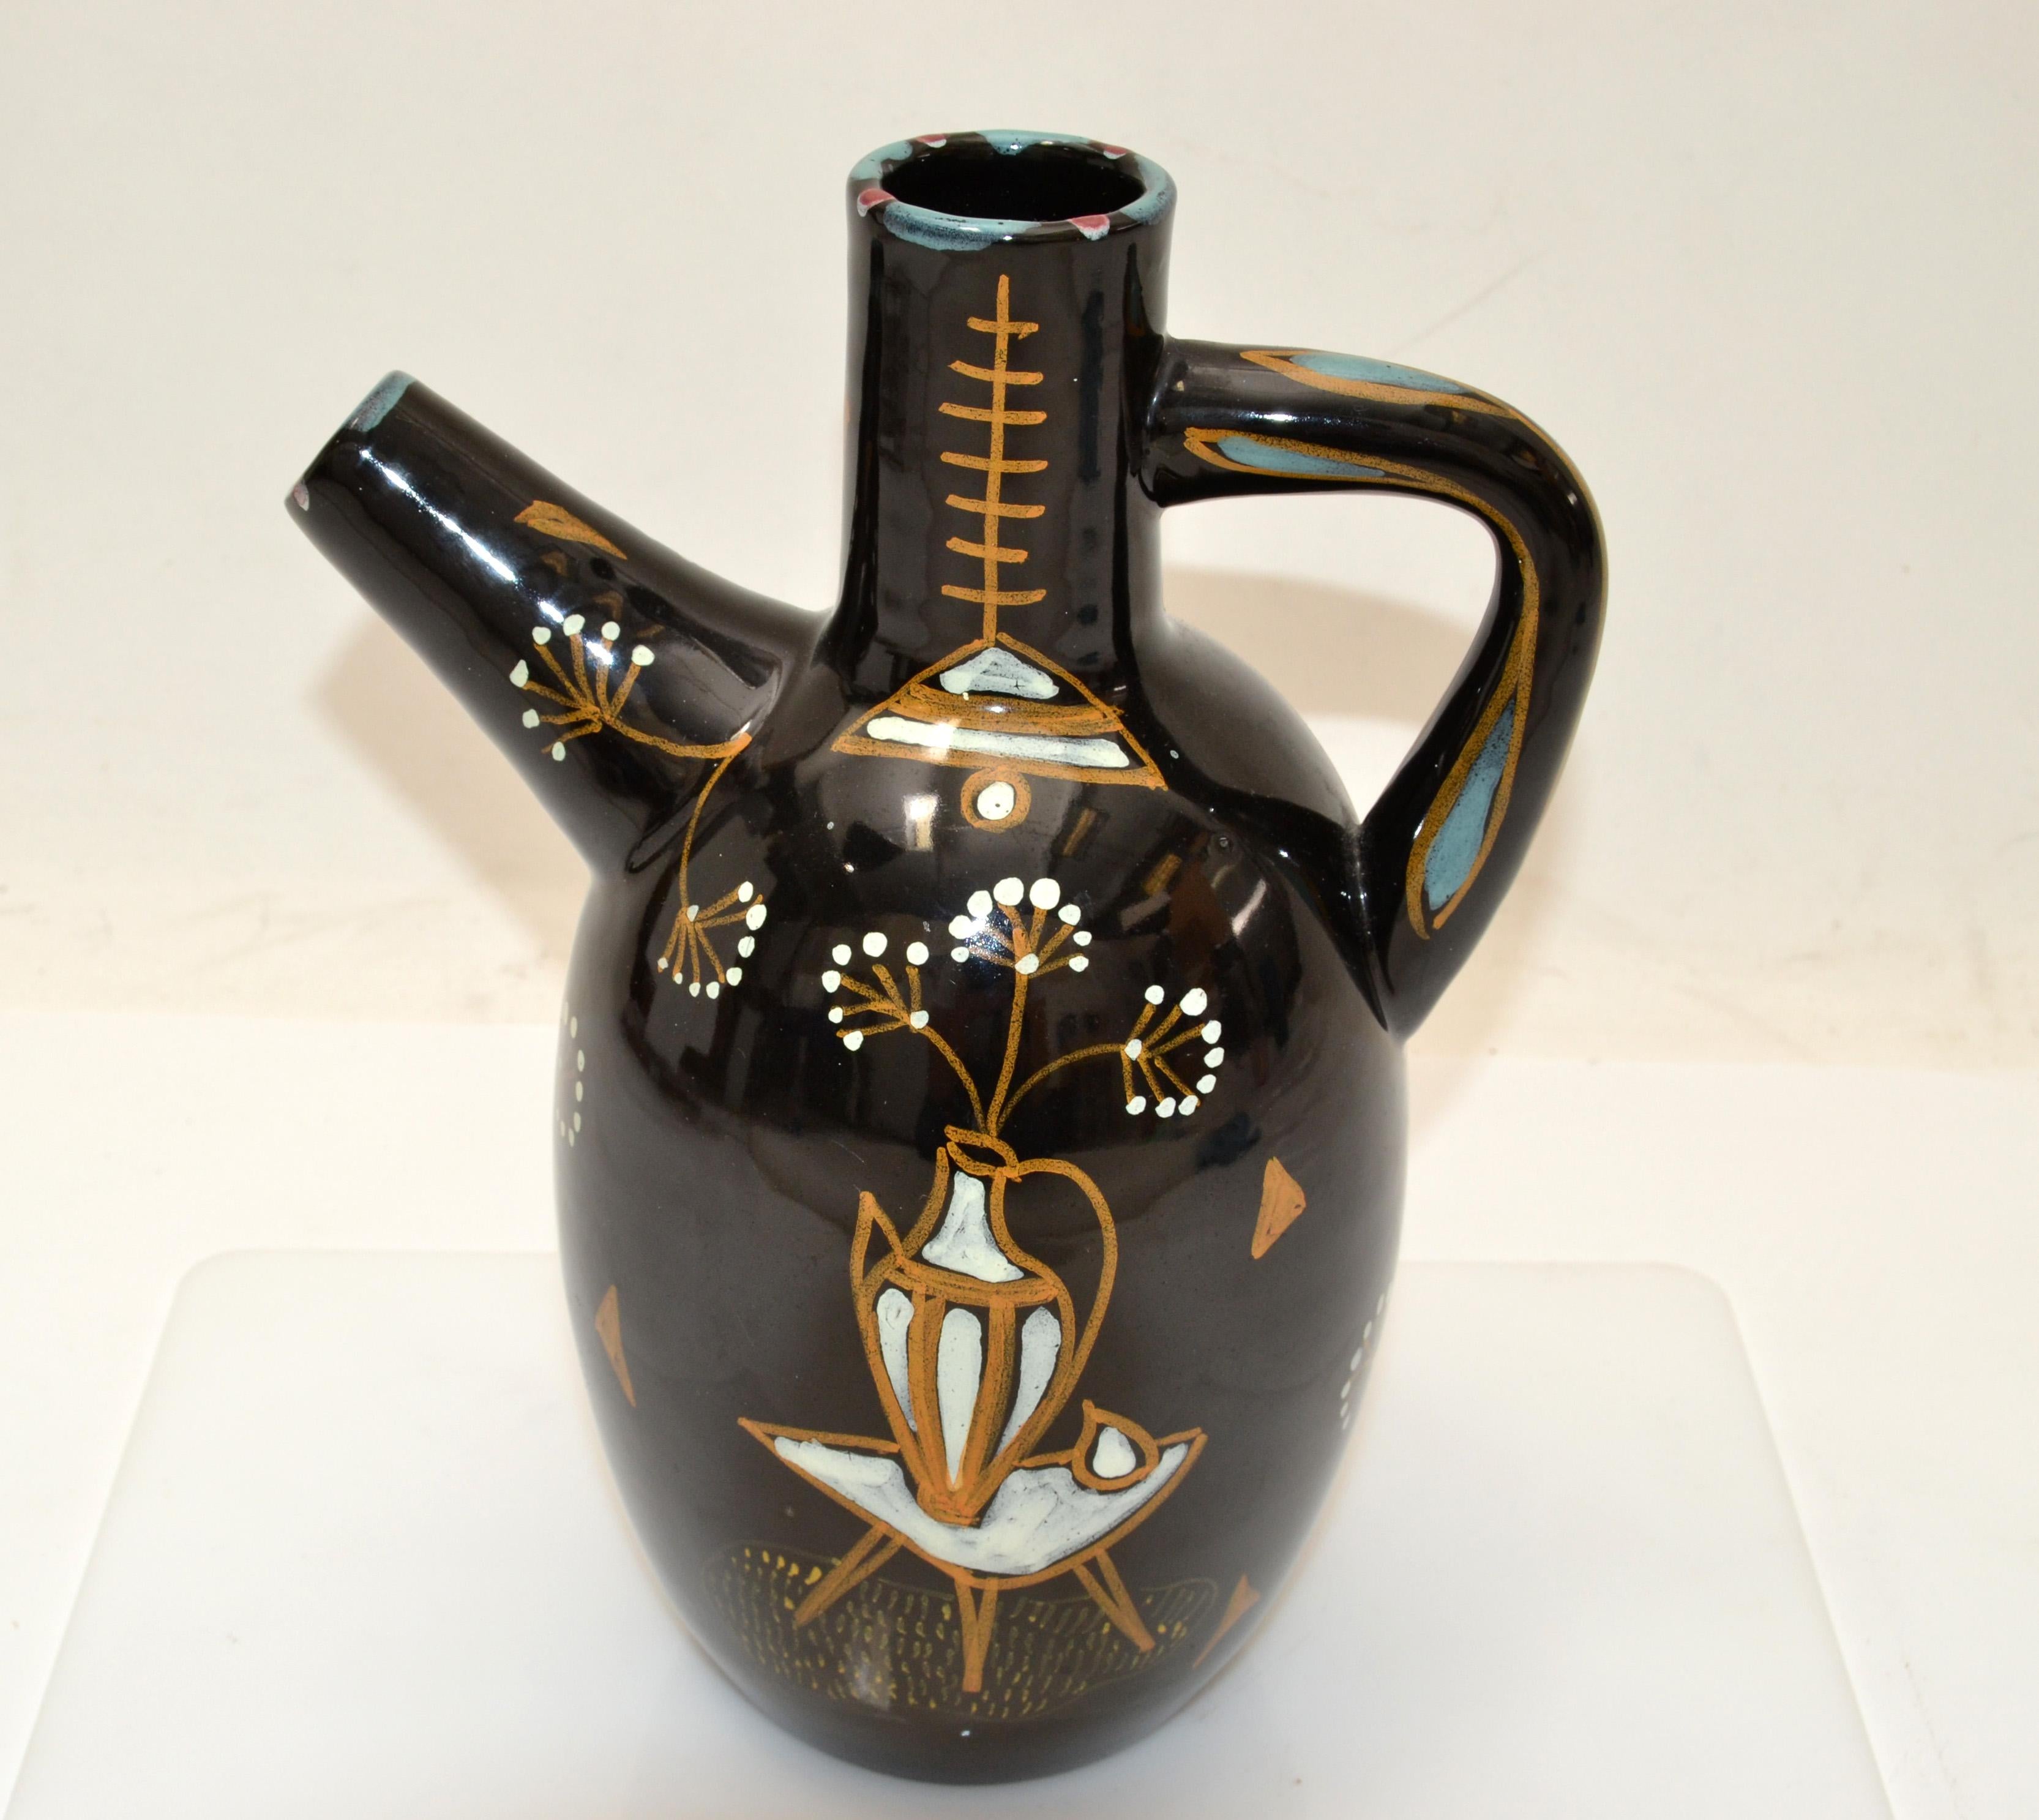 ARDALT Italy Mid-Century Modern tall Ceramic vase, vessel, decanter in black Gold, white & turquoise hand painted Decor.
Italian Pottery Glazed inside and outside made in the late 1970.
At the Base it is numbered 5757 and marked ARDALT